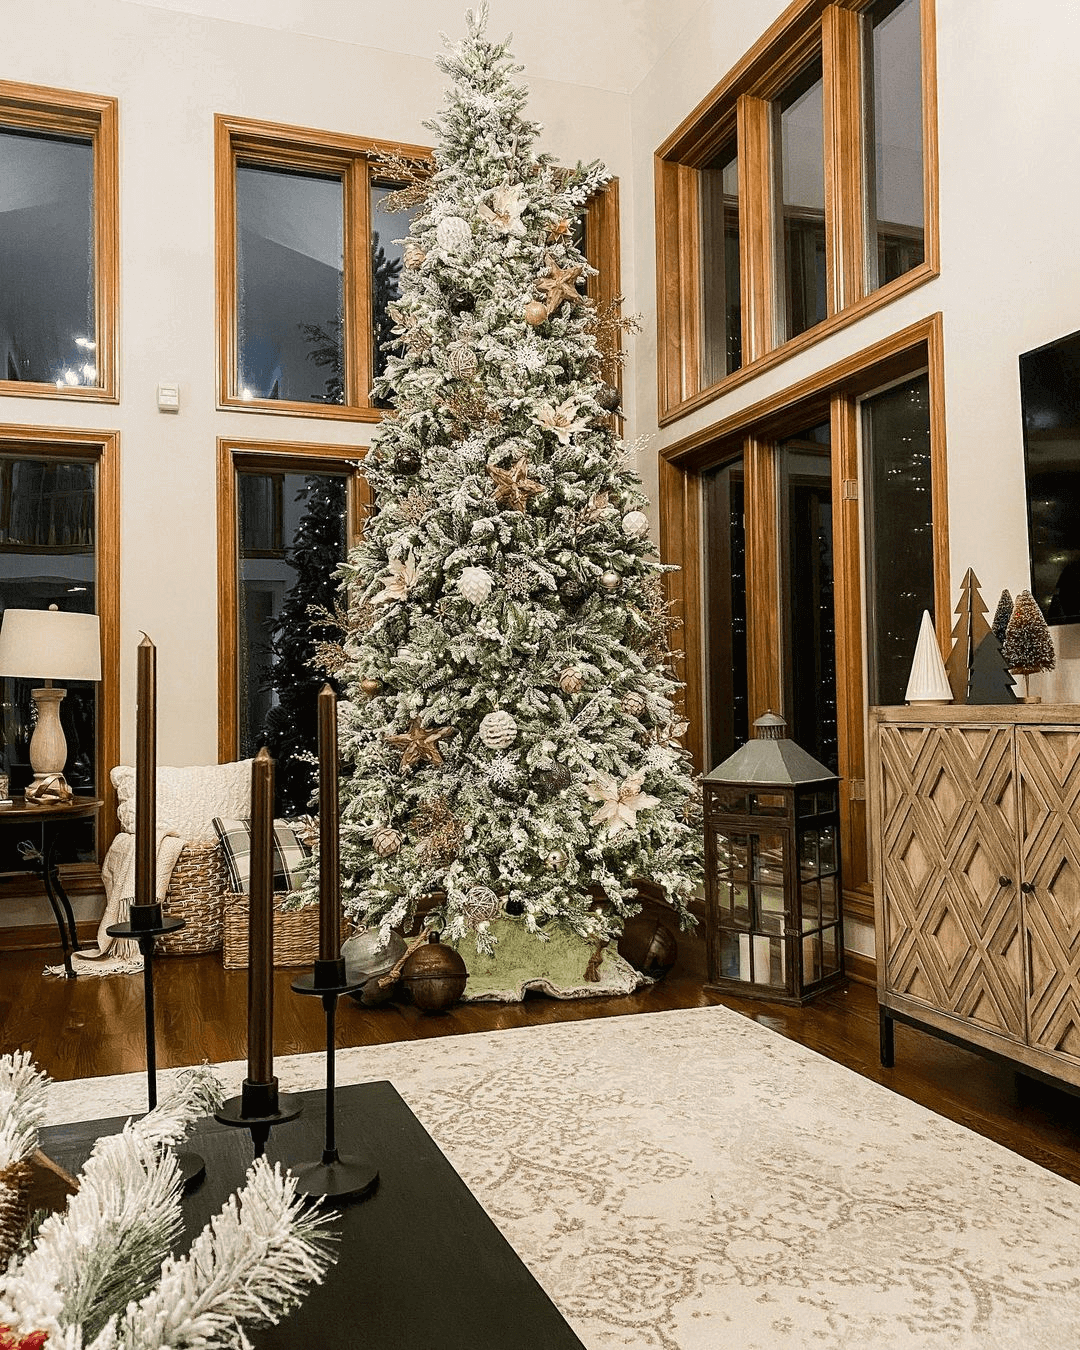 King of Christmas 9' Queen Flock® Slim Artificial Christmas Tree With 900 Warm White LED Lights